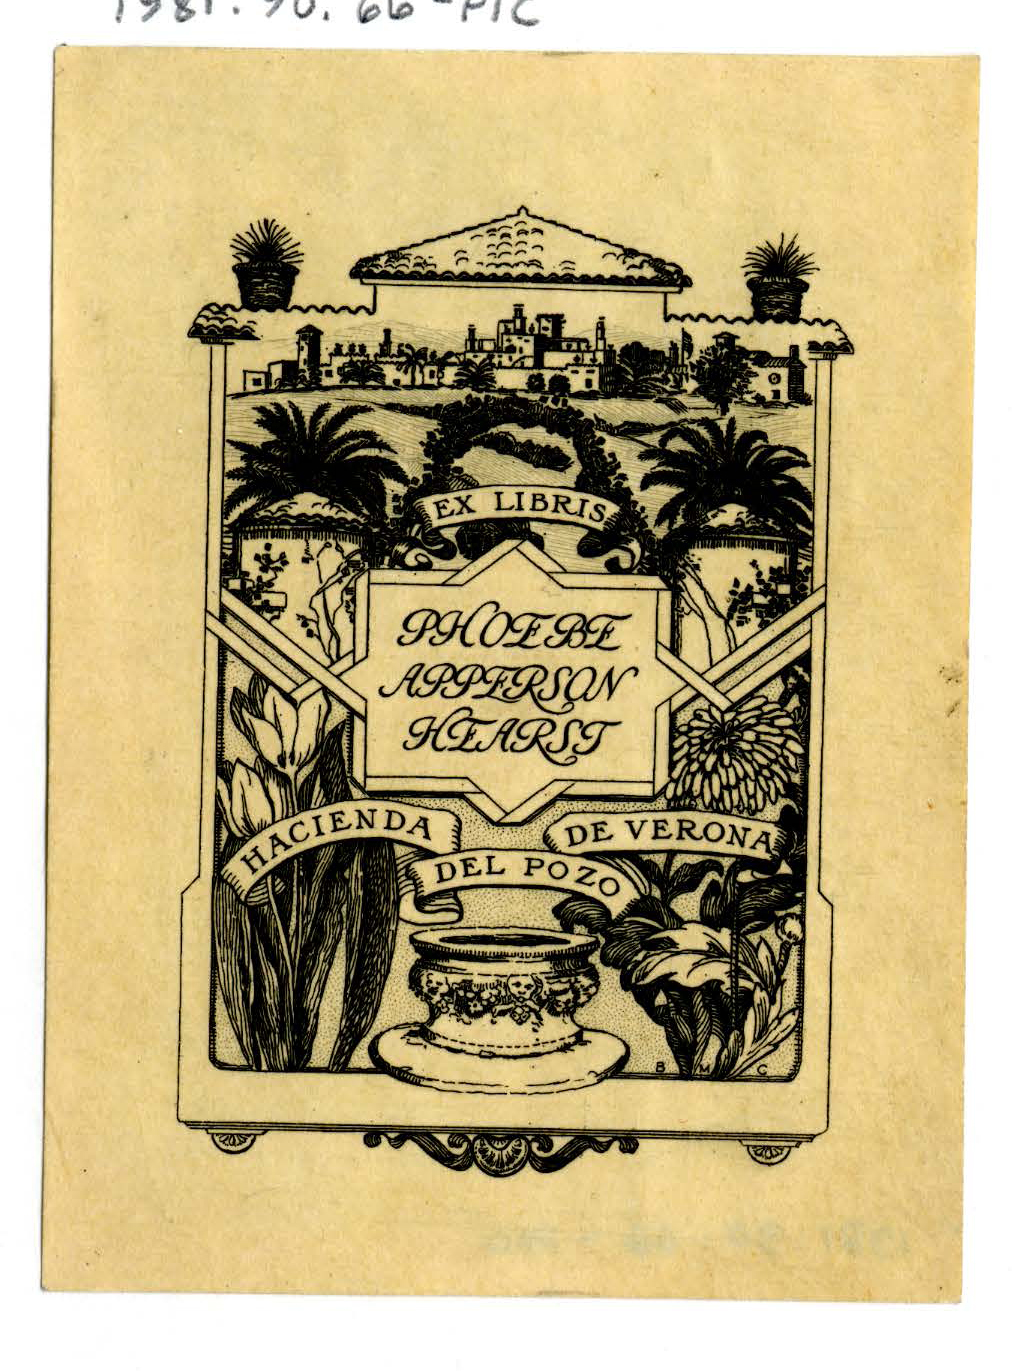 Bookplate of Phoebe Apperson Hearst